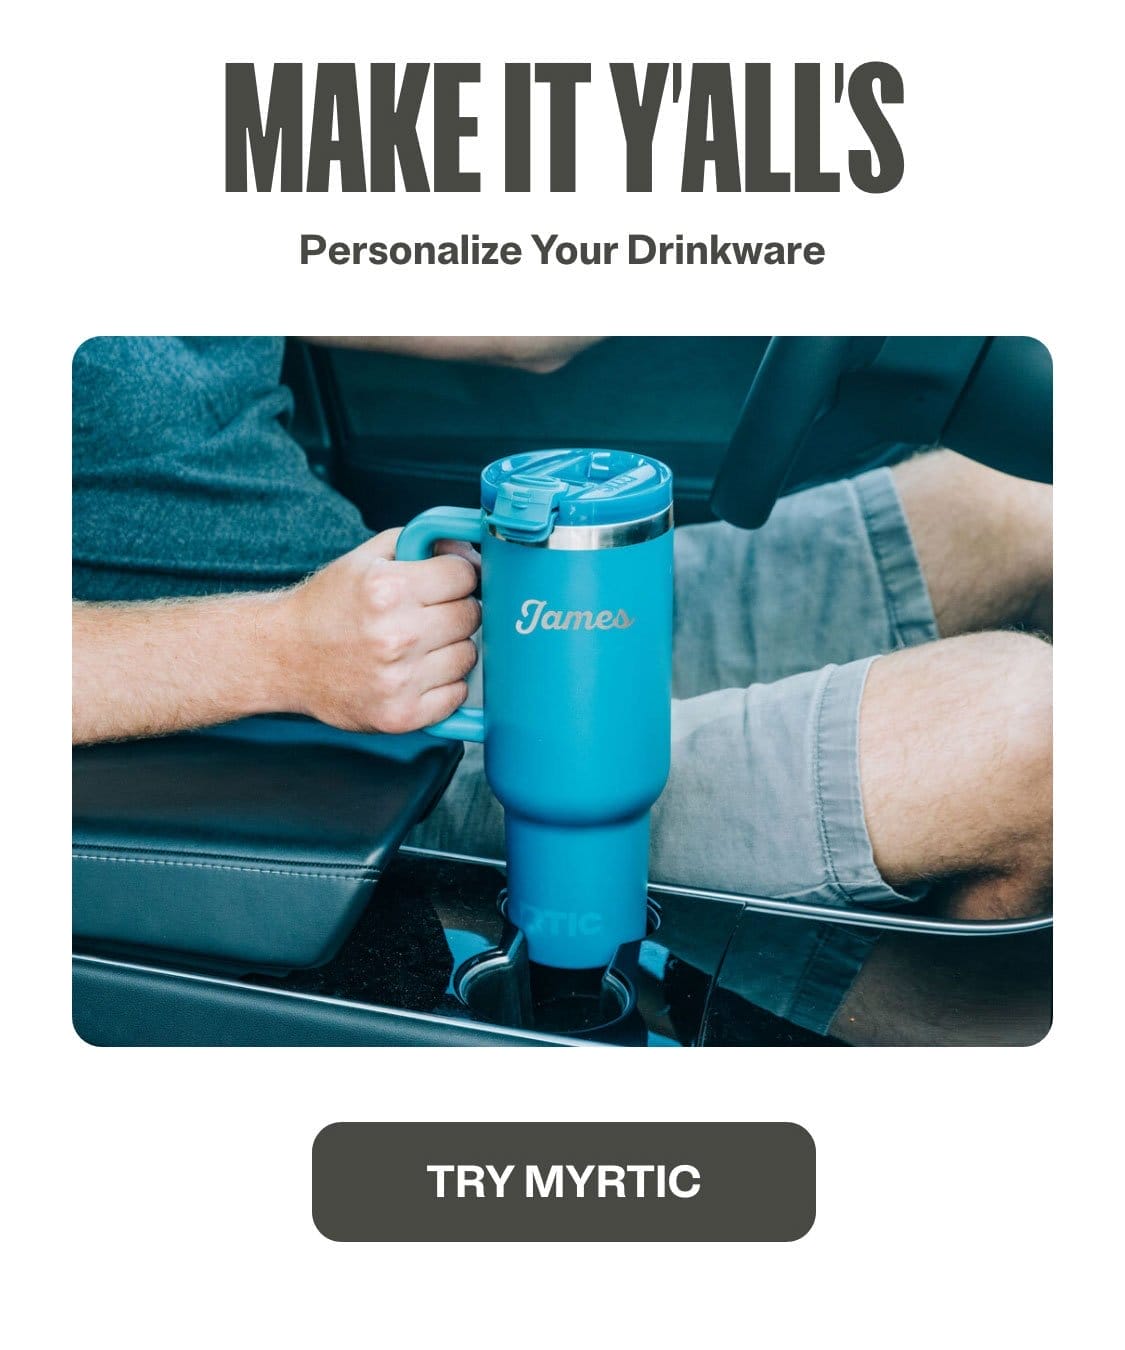 Make it y'alls - personalize your drinkware with myRTIC.